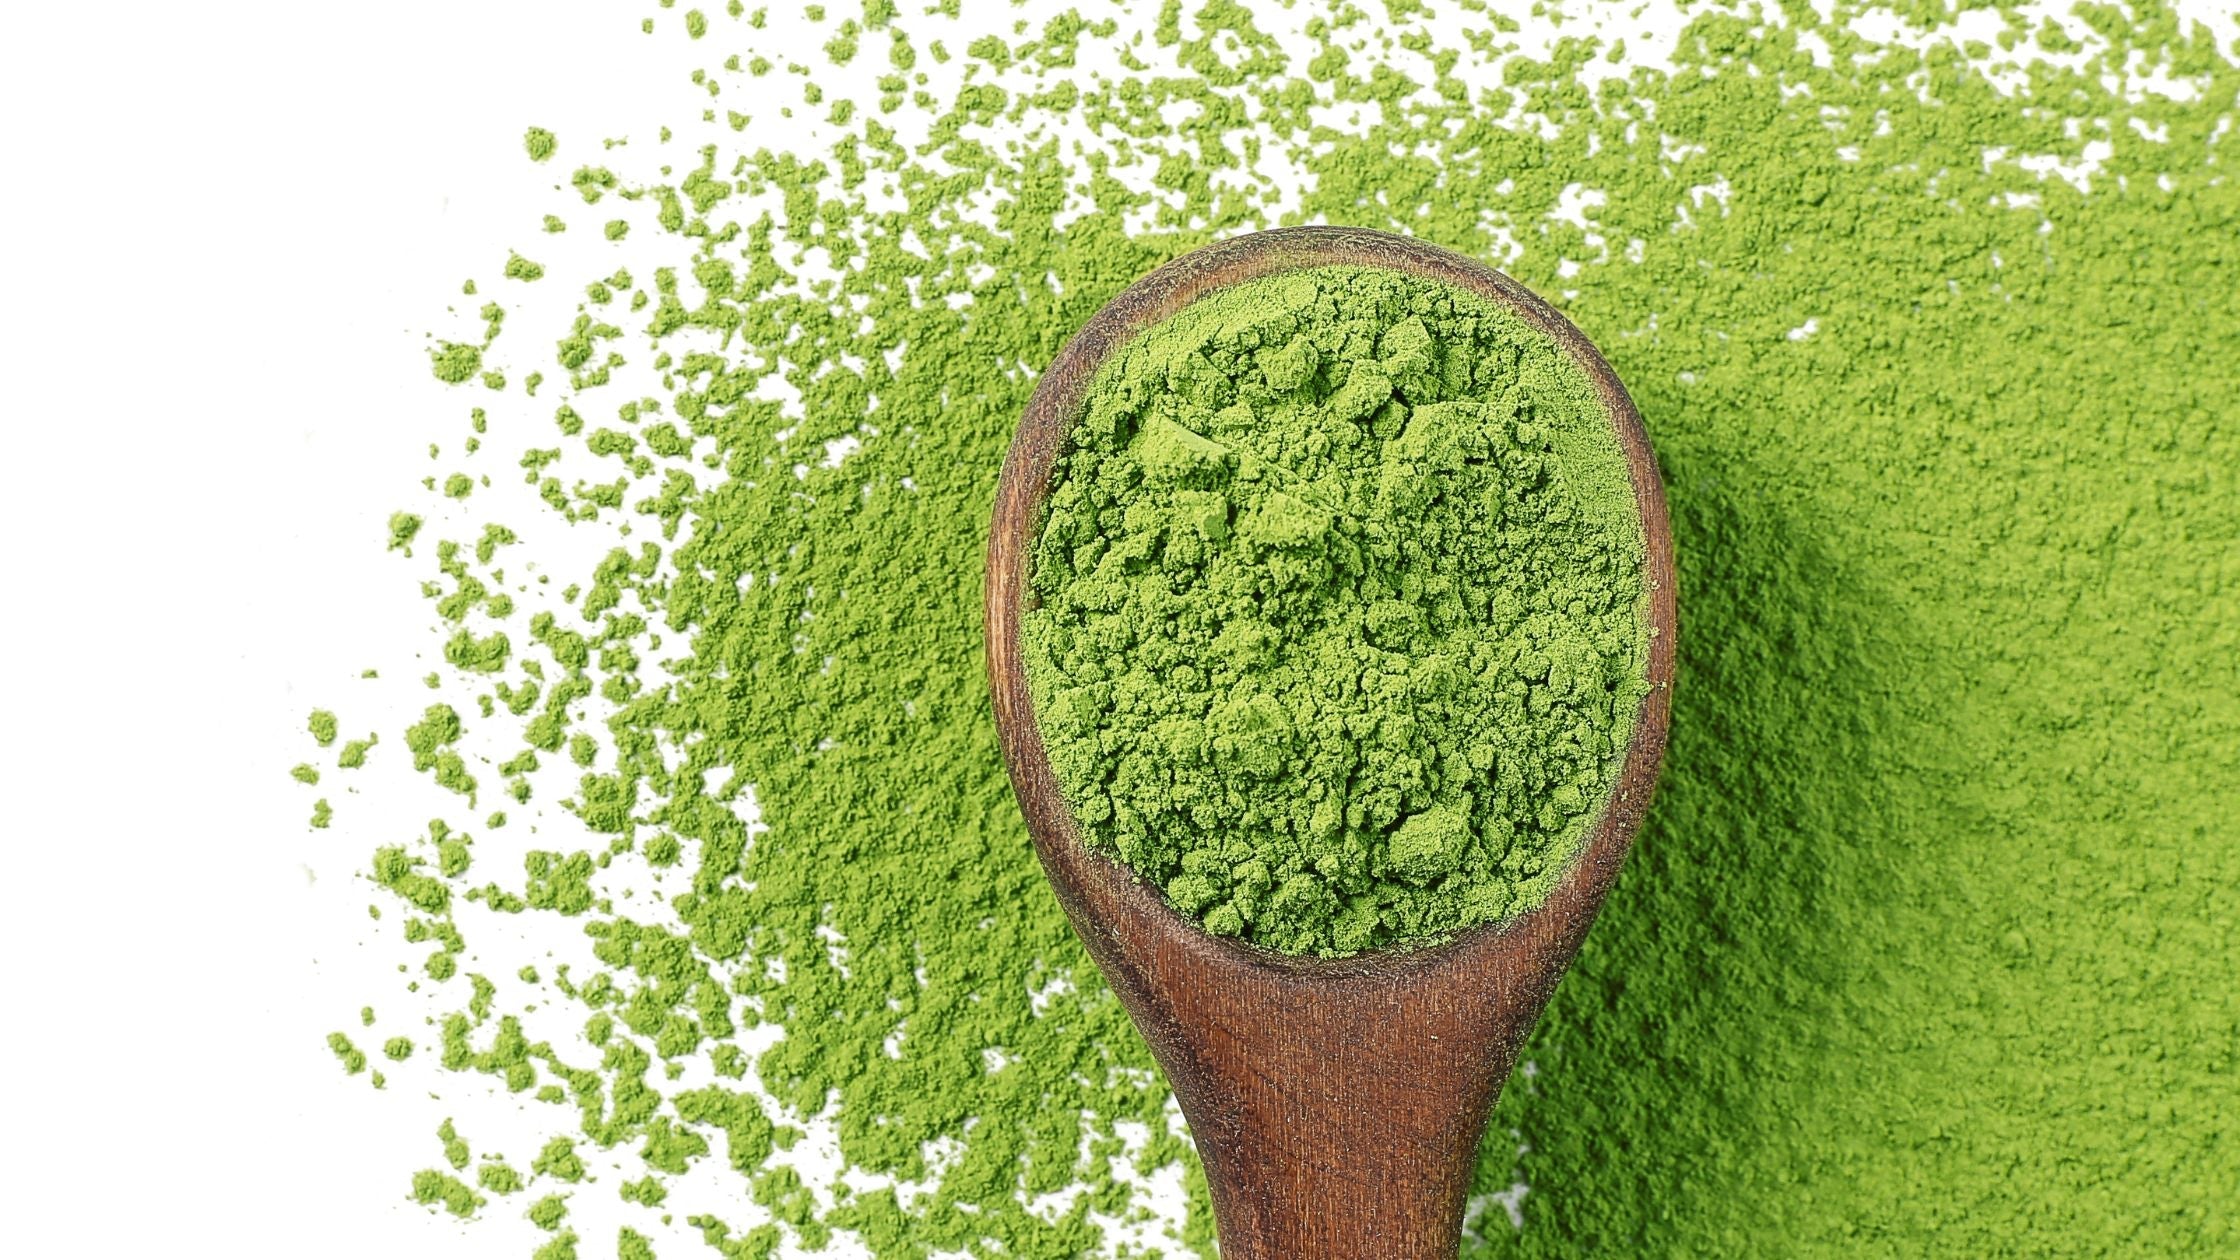 Matcha is a powdered form of green tea that is made by grinding the entire tea leaf into a fine powder.